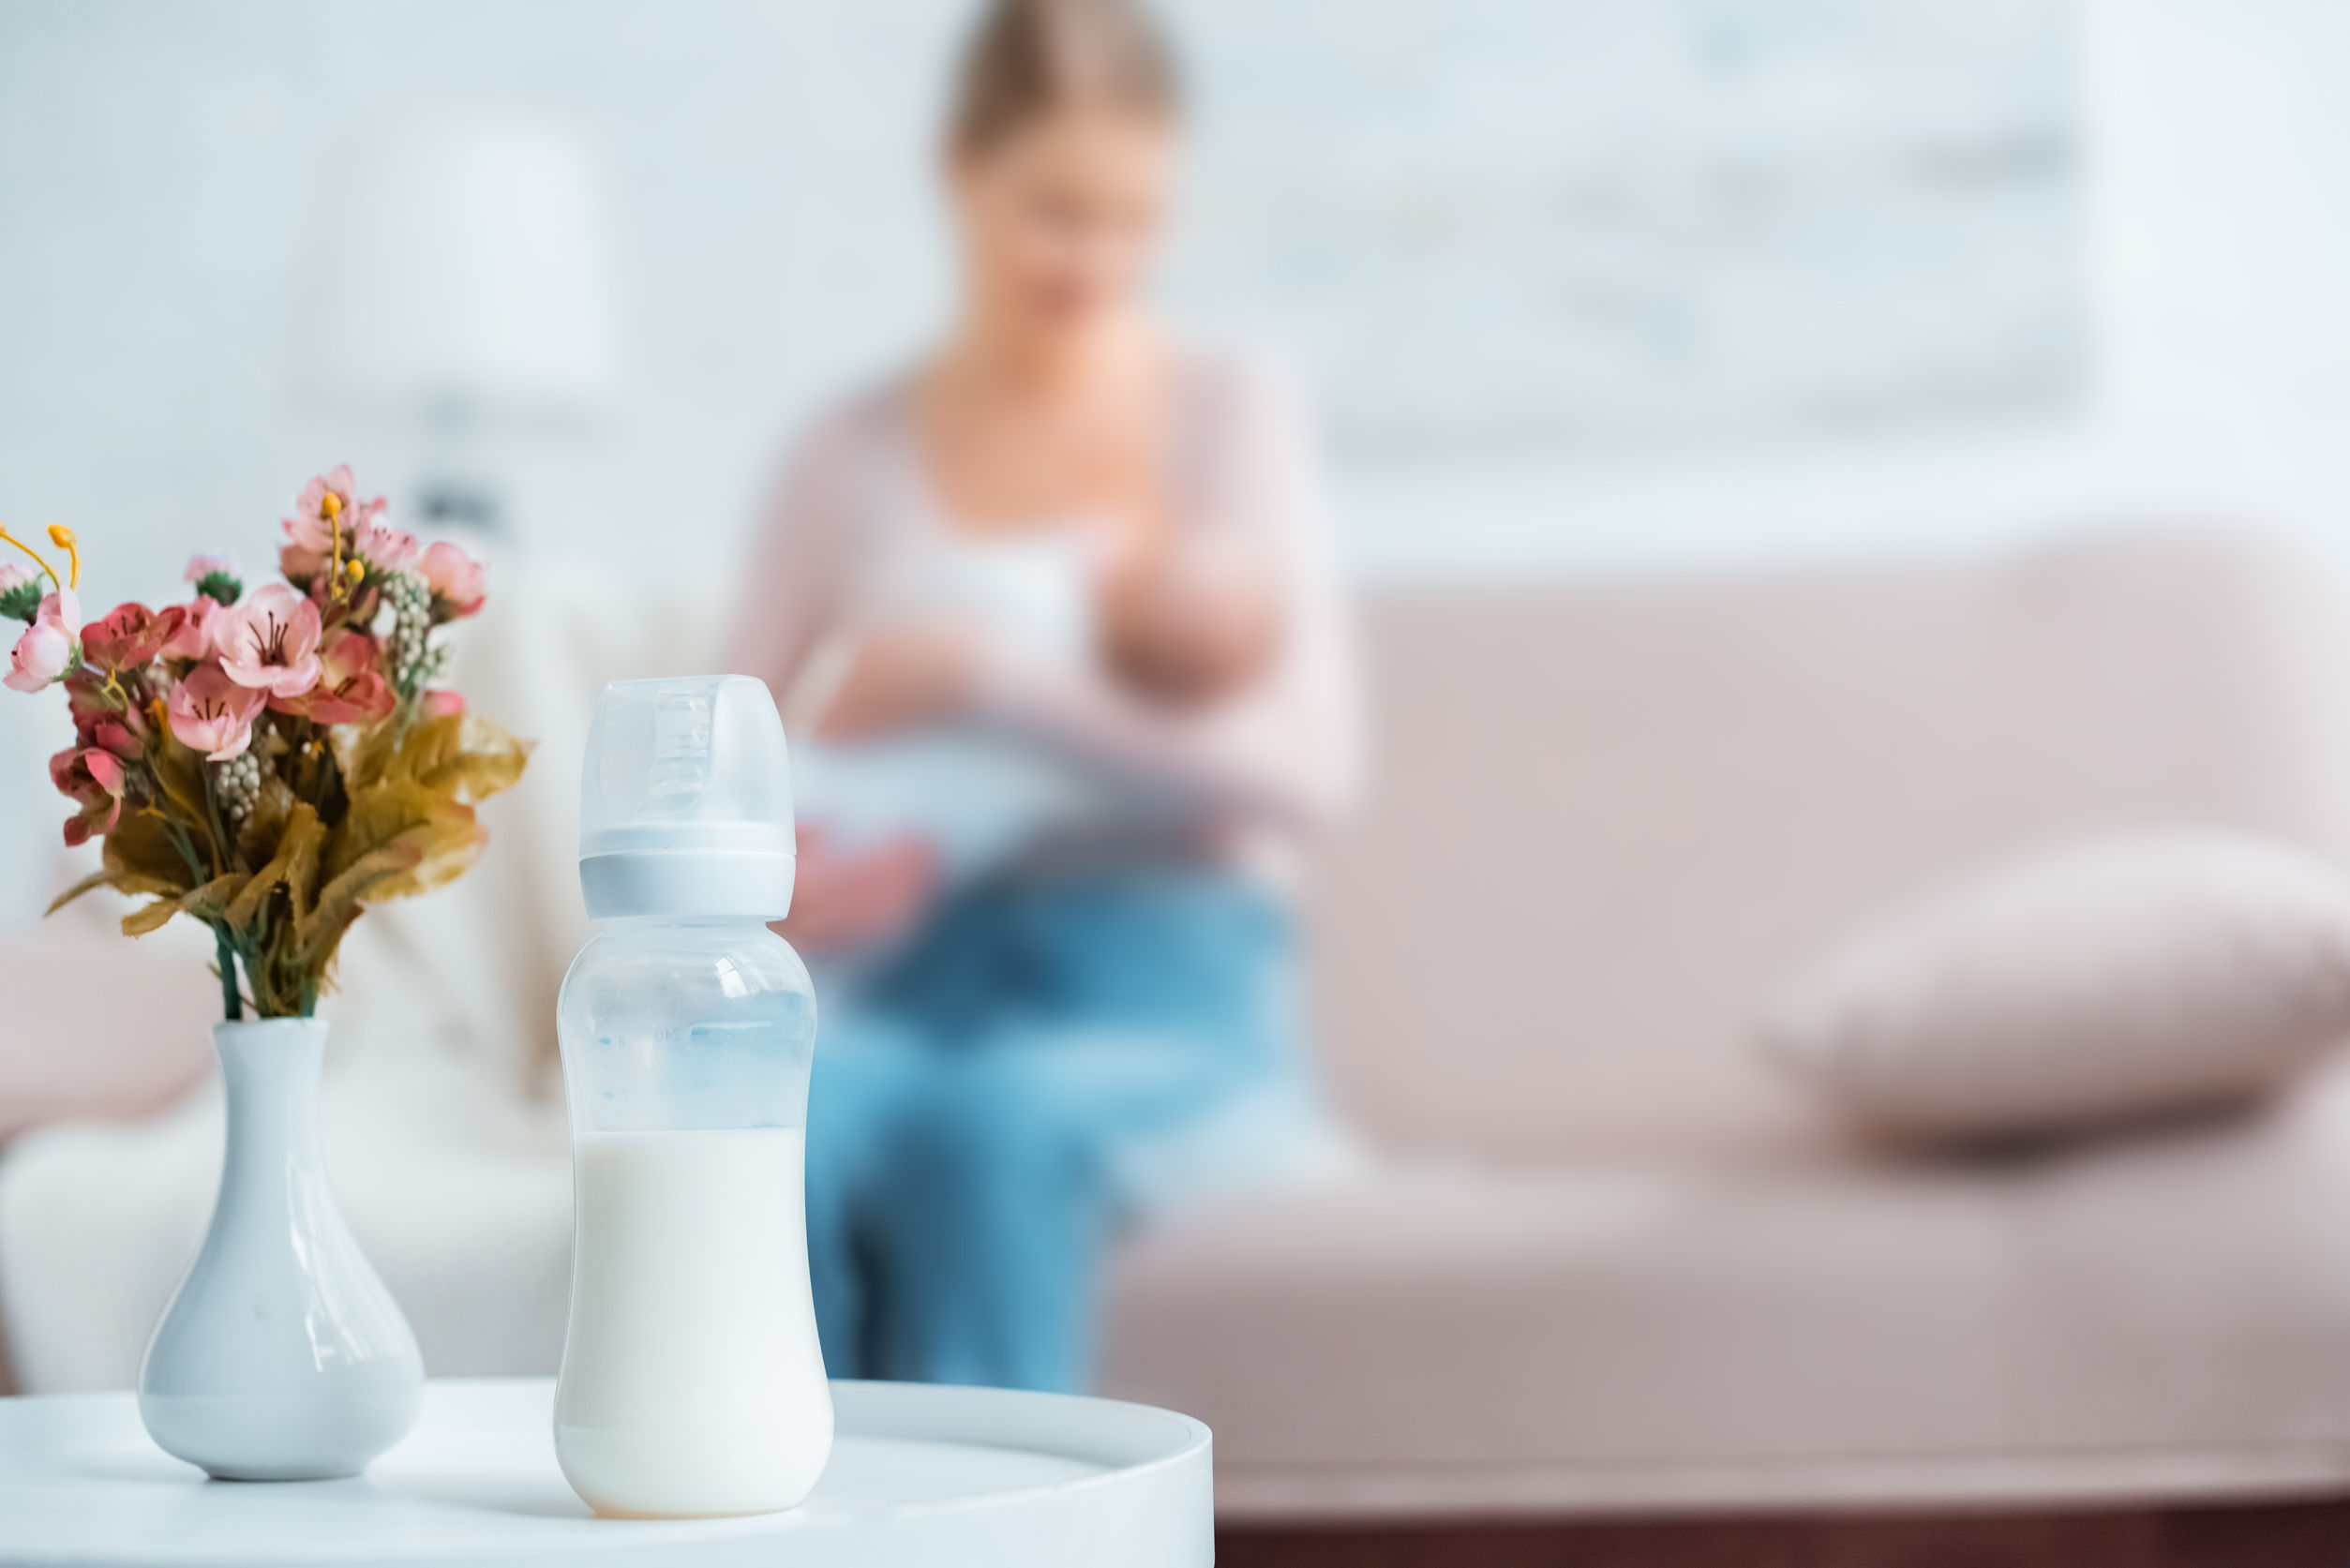 Photo of a bottle of breast milk. A mother is breastfeeding her child in the background.